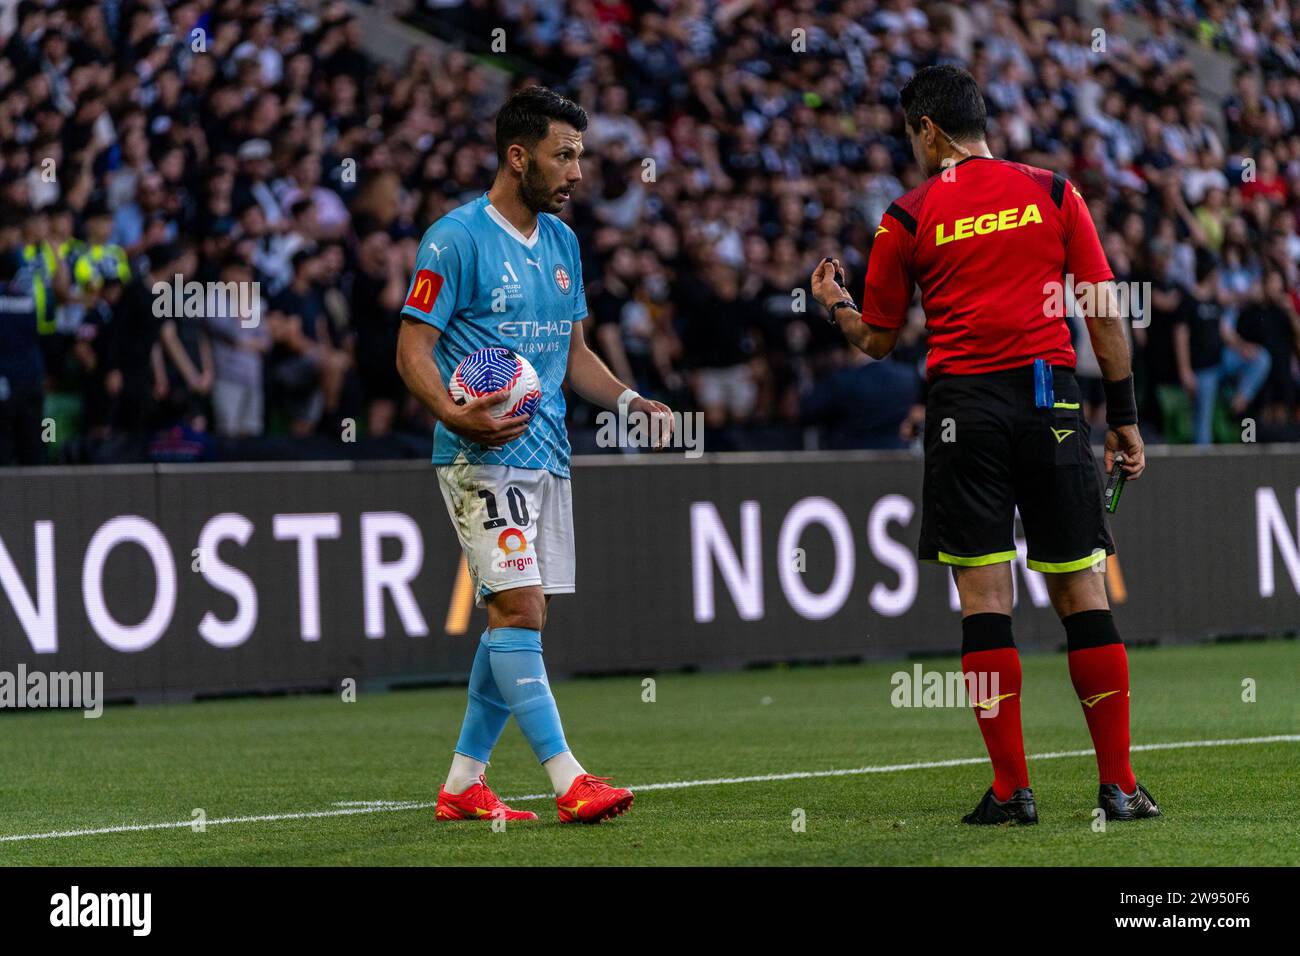 Melbourne, Australia. 23 December, 2023. Melbourne City FC Midfielder Tolgay Arslan (#10) gets a talking to from match official Alireza Faghani during the Isuzu UTE A-League match between Melbourne City FC and Melbourne Victory FC at AAMI Park in Melbourne, Australia. Credit: James Forrester/Alamy Live News Stock Photo